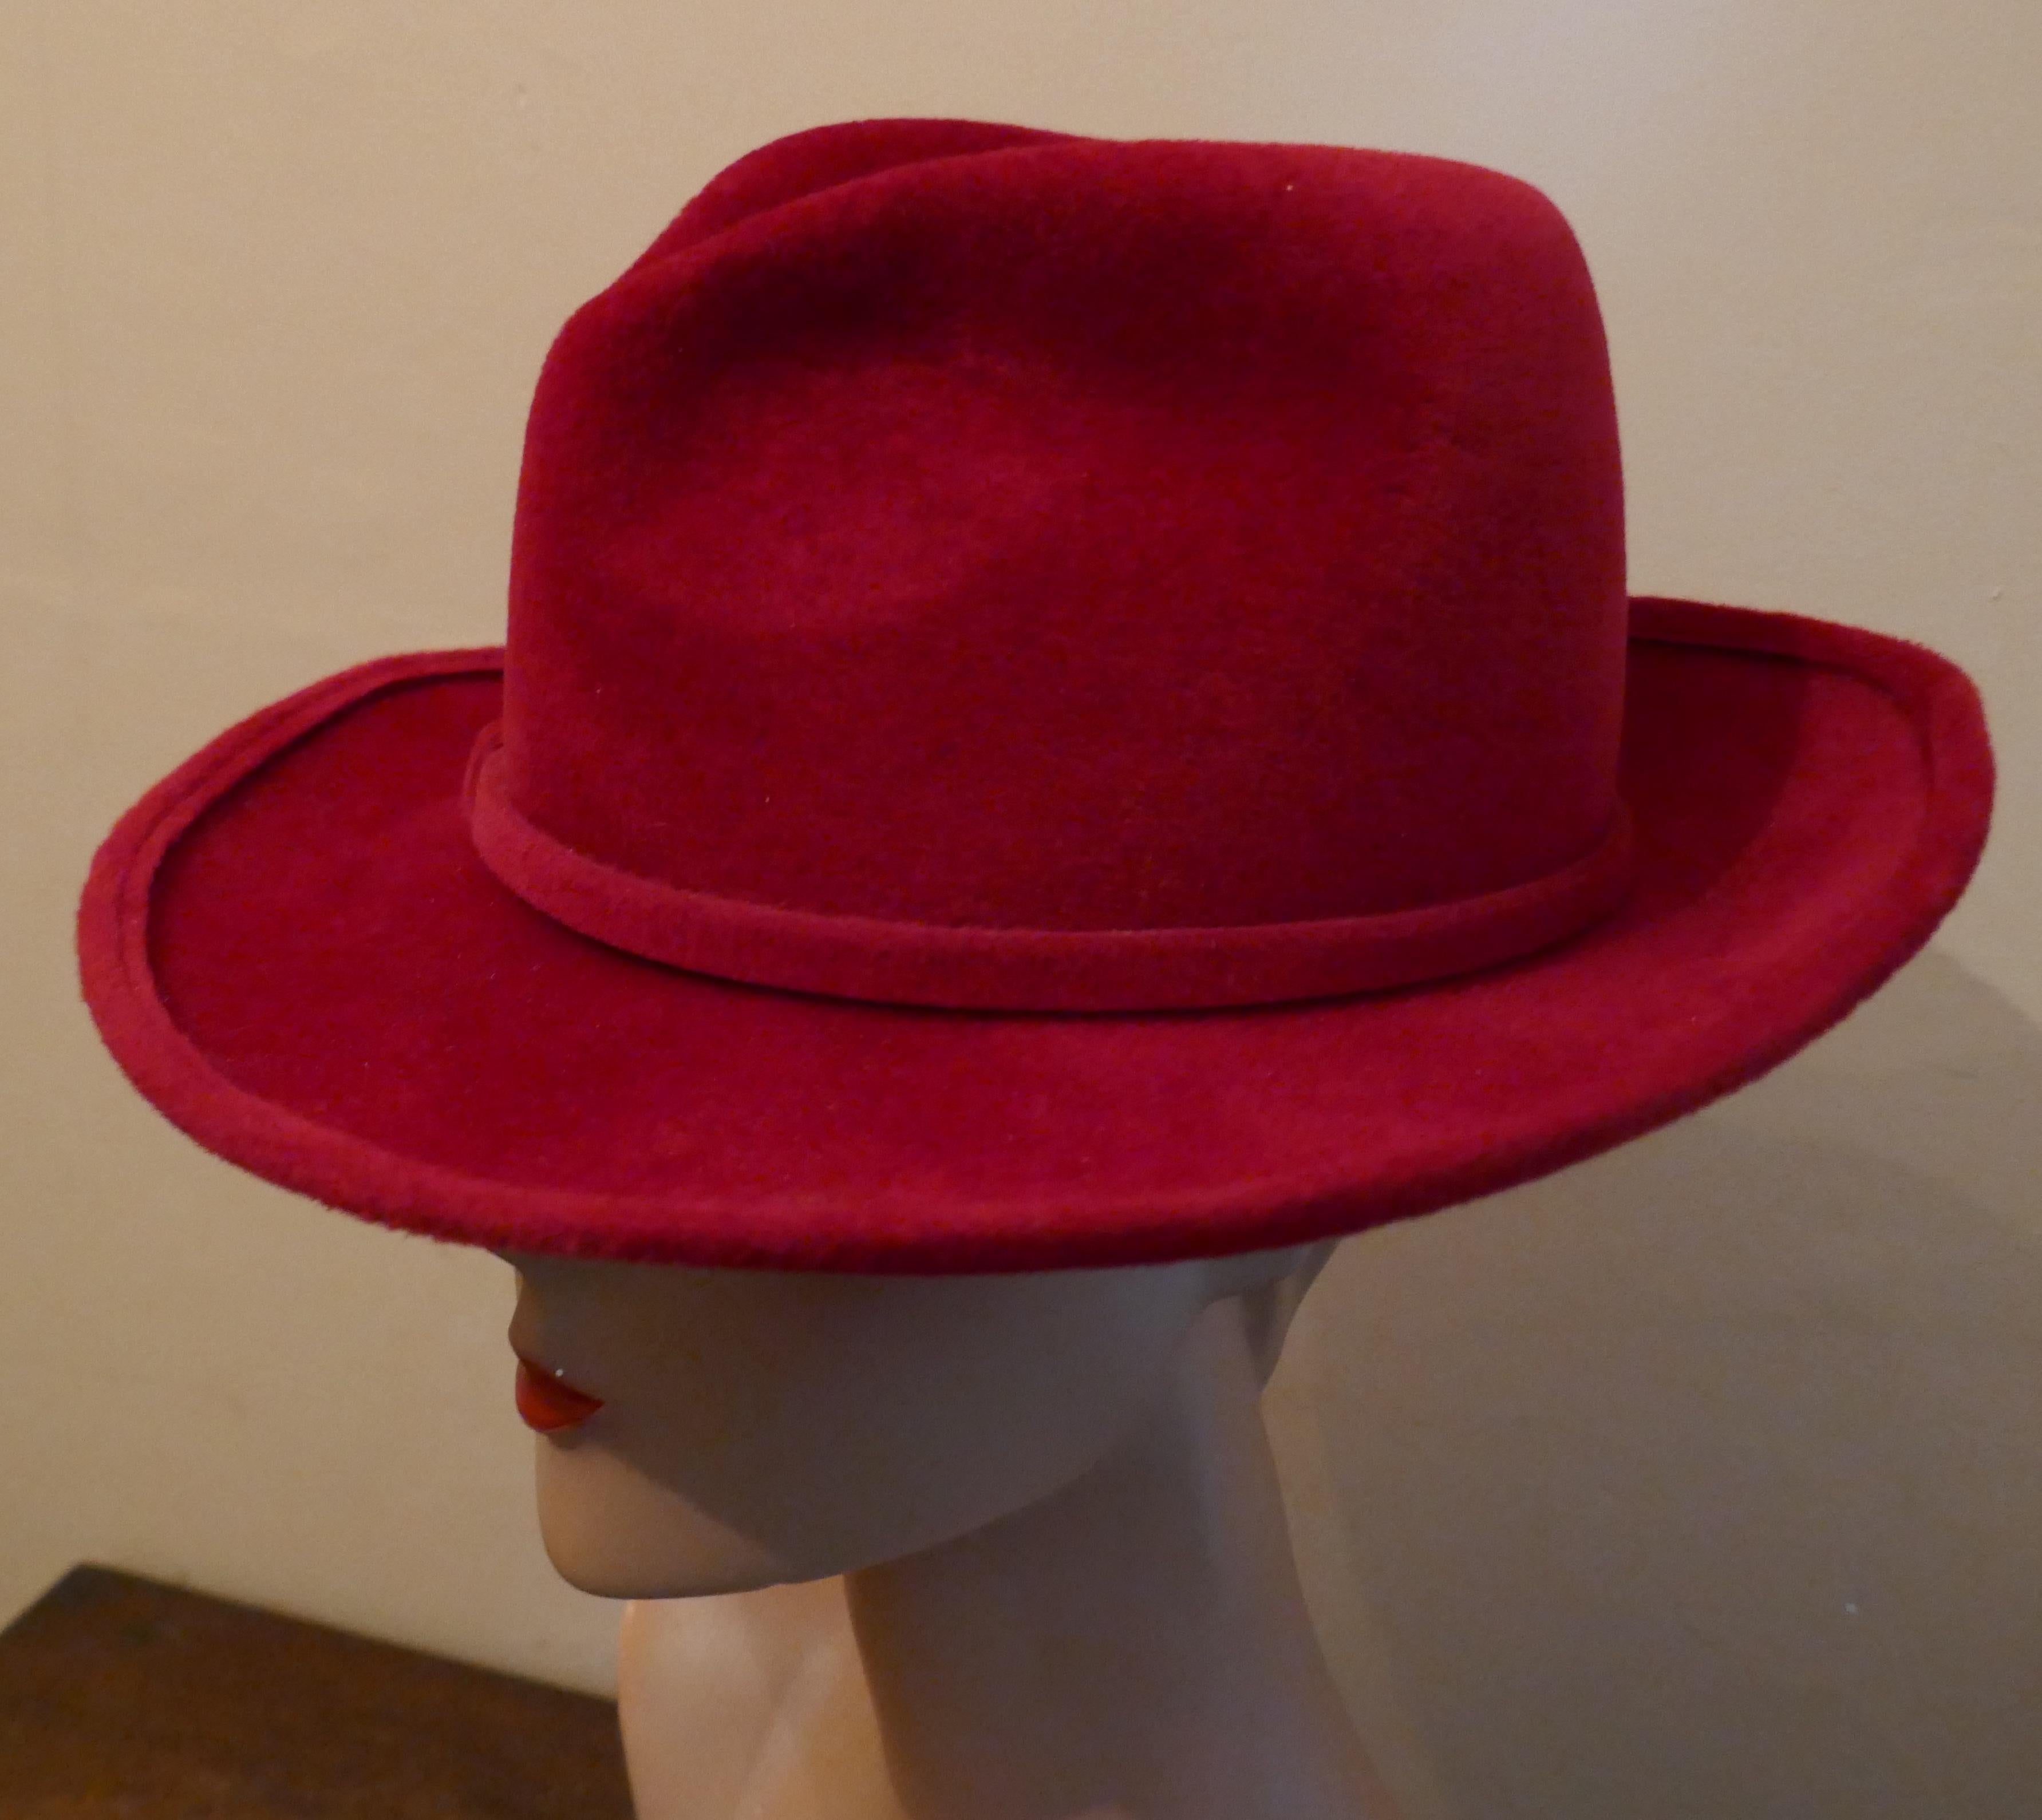 Original 1960s Red Fedora Style Hat designed by Marida

This gorgeous Hat is made 100% fur Felt, it has knotted band and a stitched brim
This one is an exquisite design wear it anywhere and be seen
The hat is  Designed by Marida, it is in good